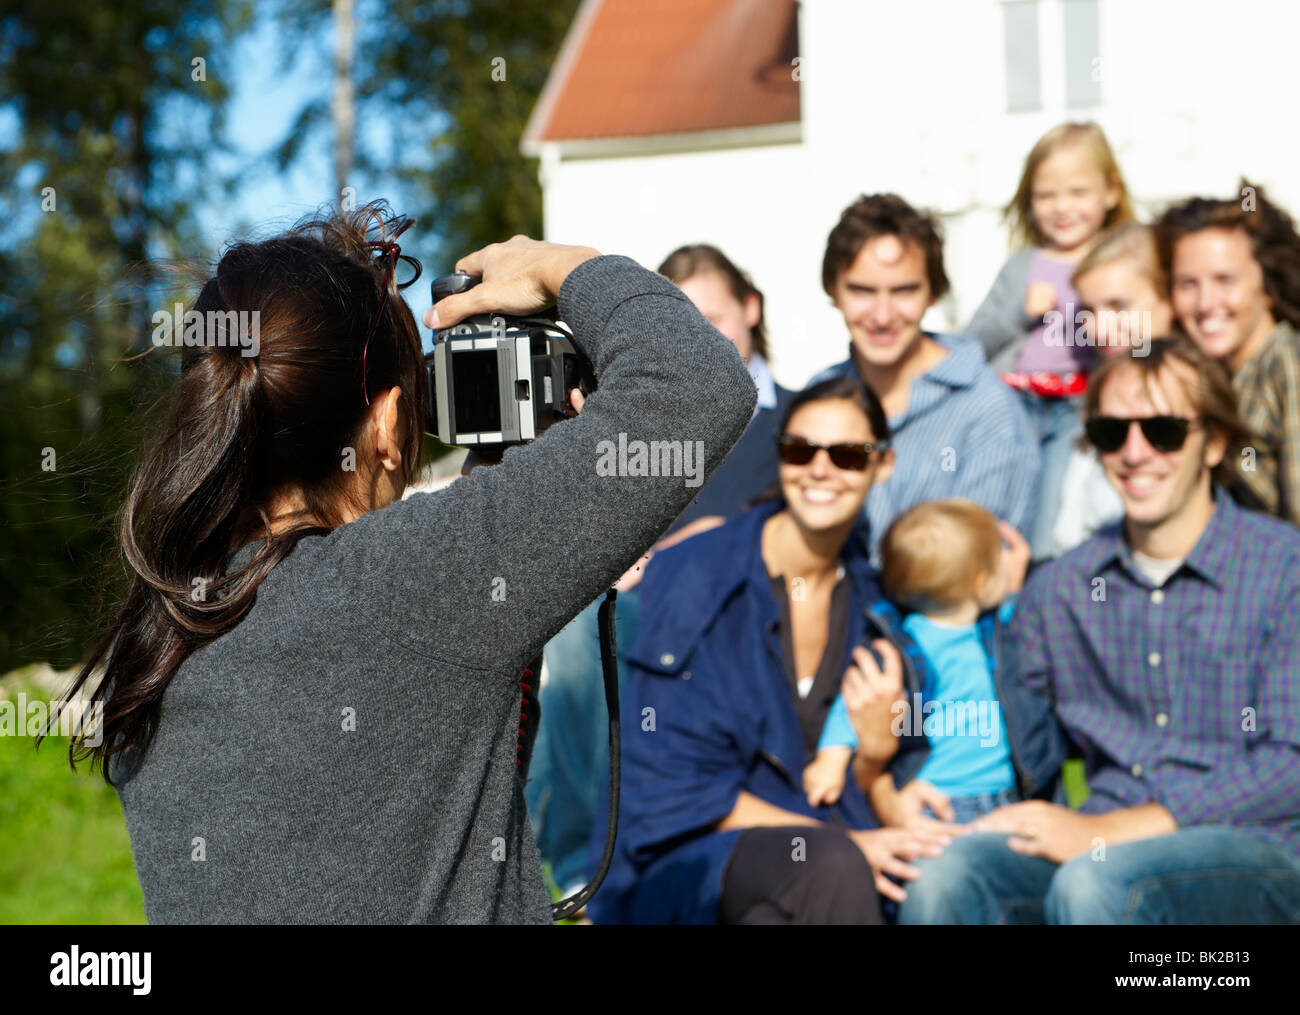 Shoot of a group of people Stock Photo